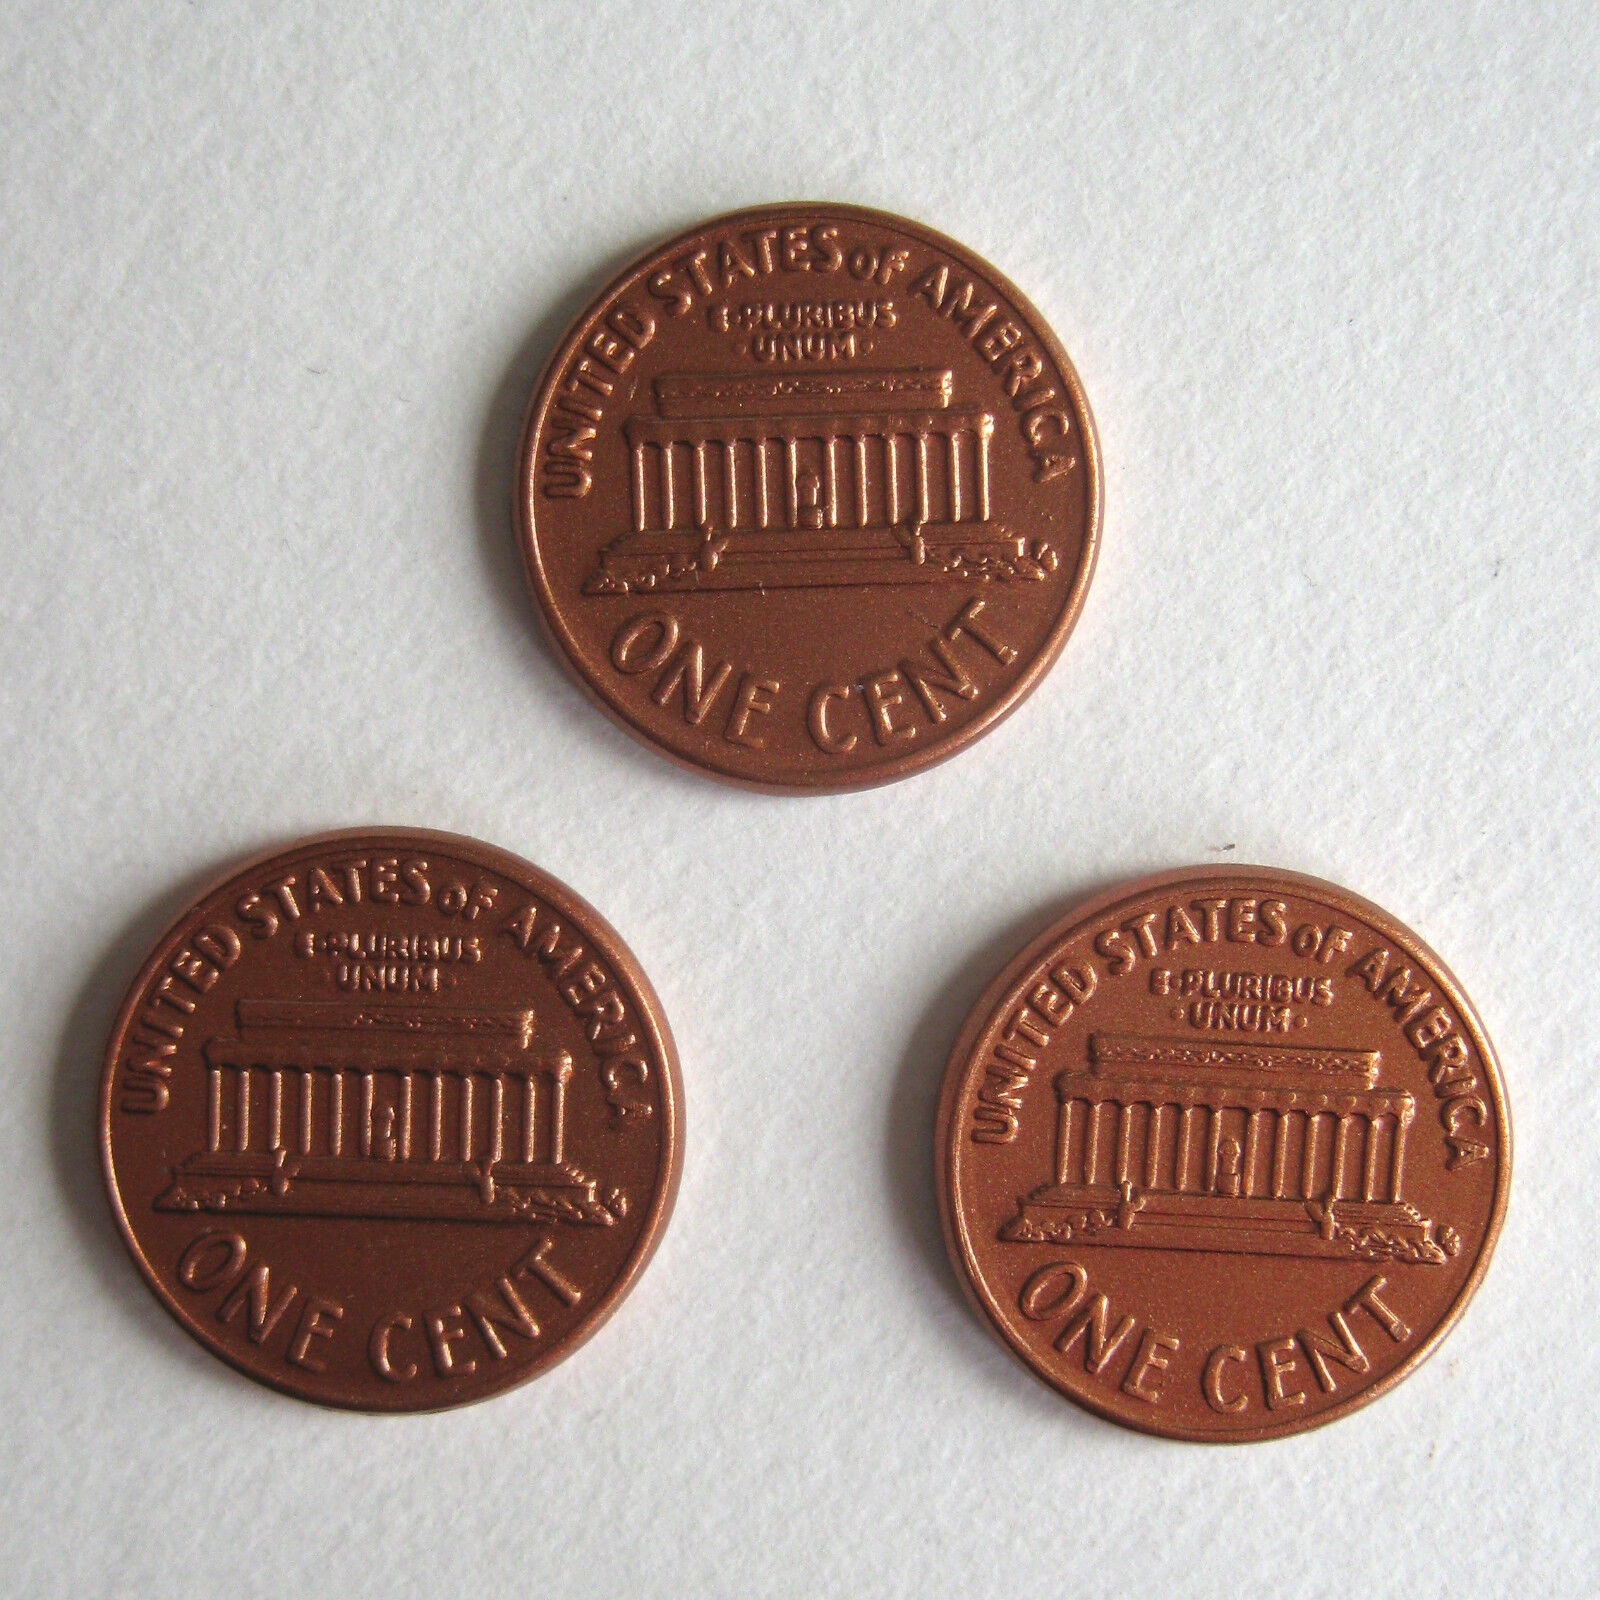 3 Pennys Shim Shell Steel Trick US Penny Tails Coin Works with Magnet